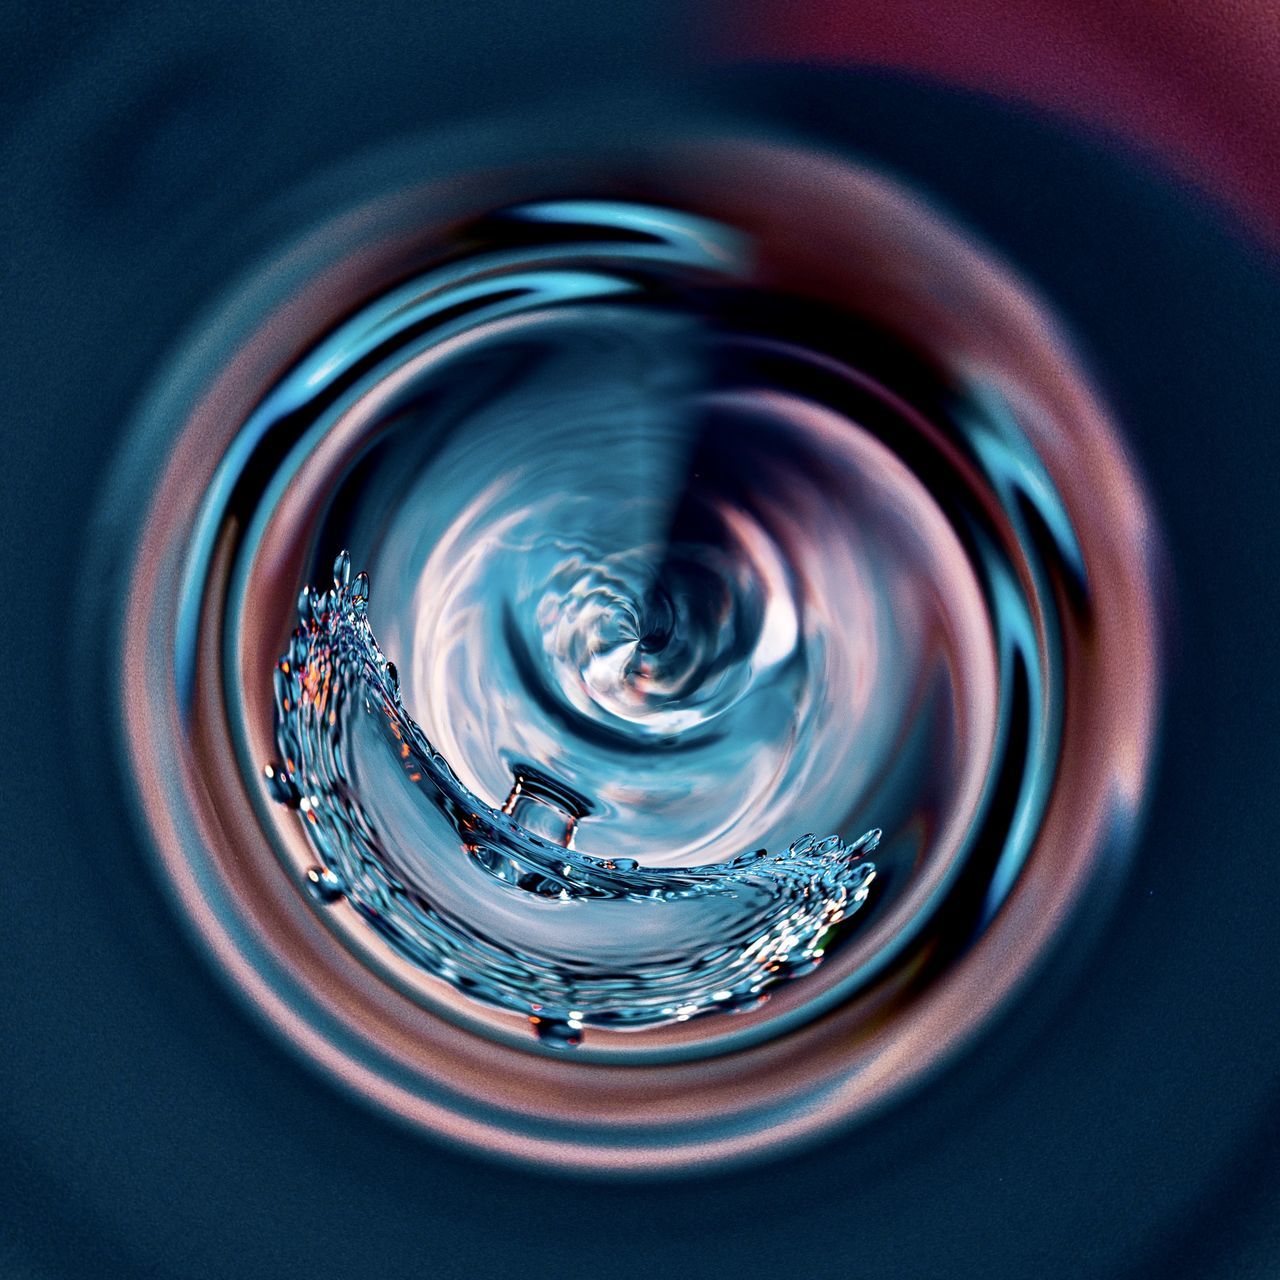 motion, close-up, selective focus, no people, water, shape, indoors, circle, drop, geometric shape, rippled, glass, abstract, nature, refreshment, concentric, full frame, drink, technology, purity